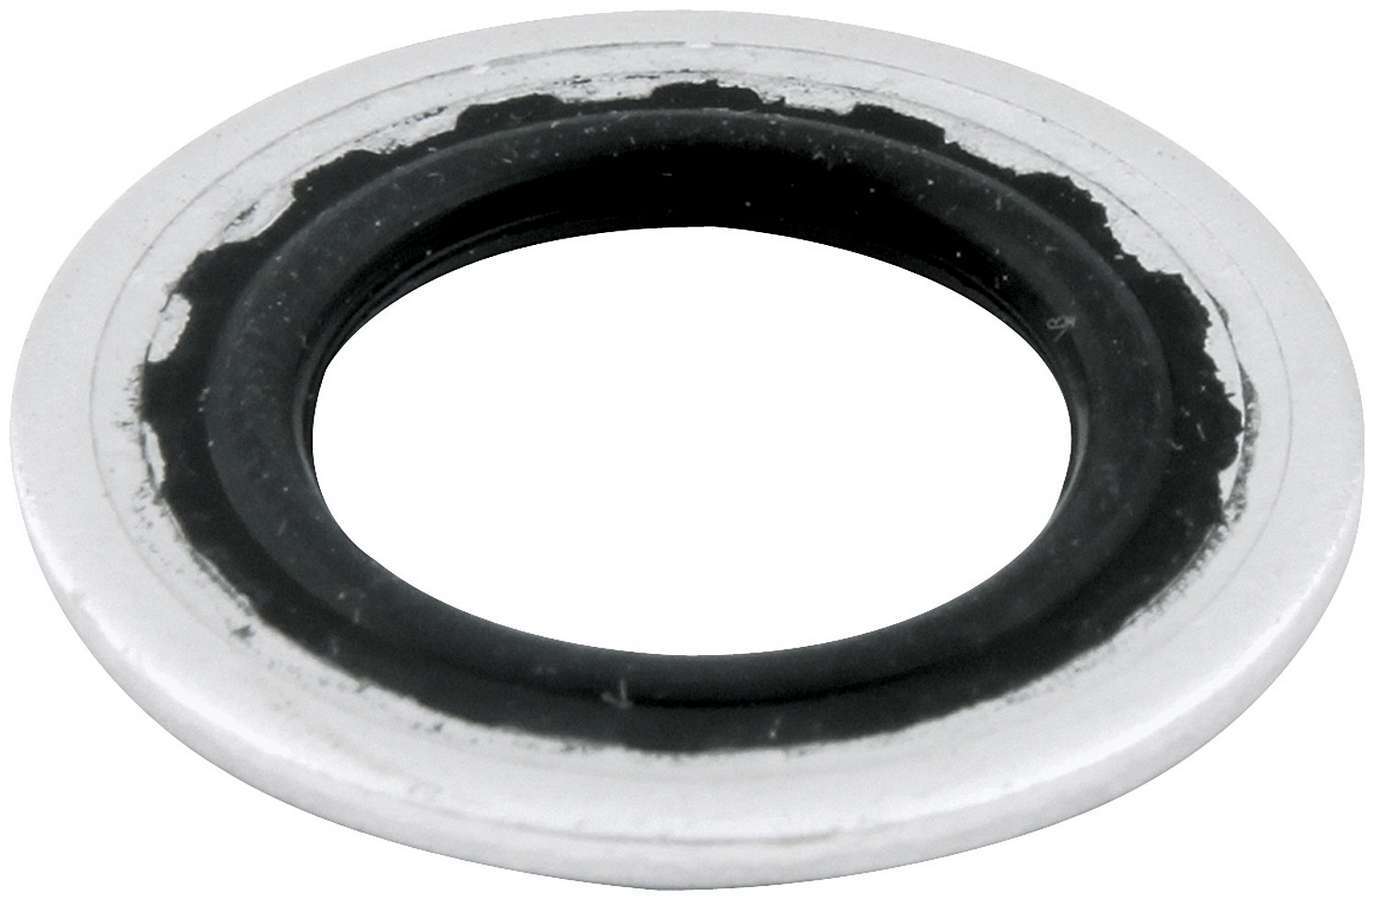 Allstar Performance 44066 - Sealing Washer for Wheel Disconnect